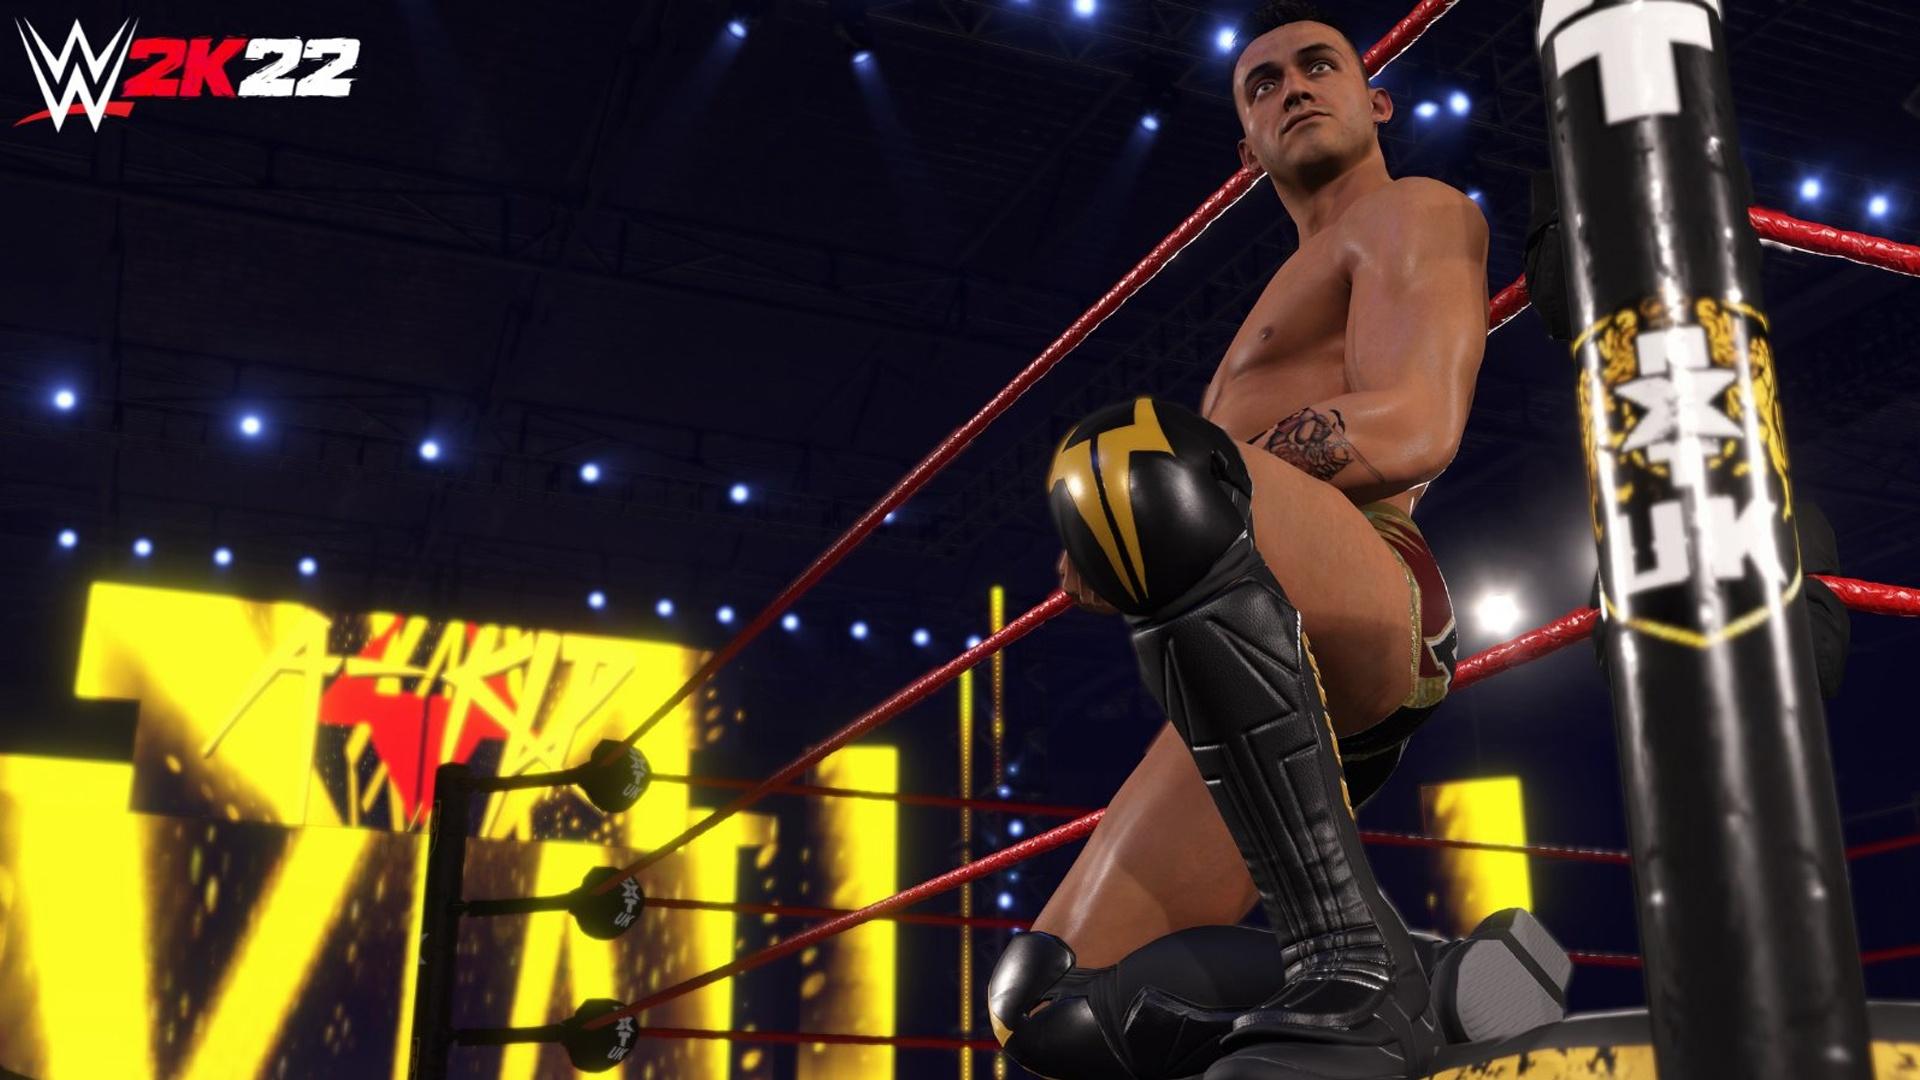 WWE 2K22 Update 1.14 Patch Notes for PlayStation, Xbox, and PC